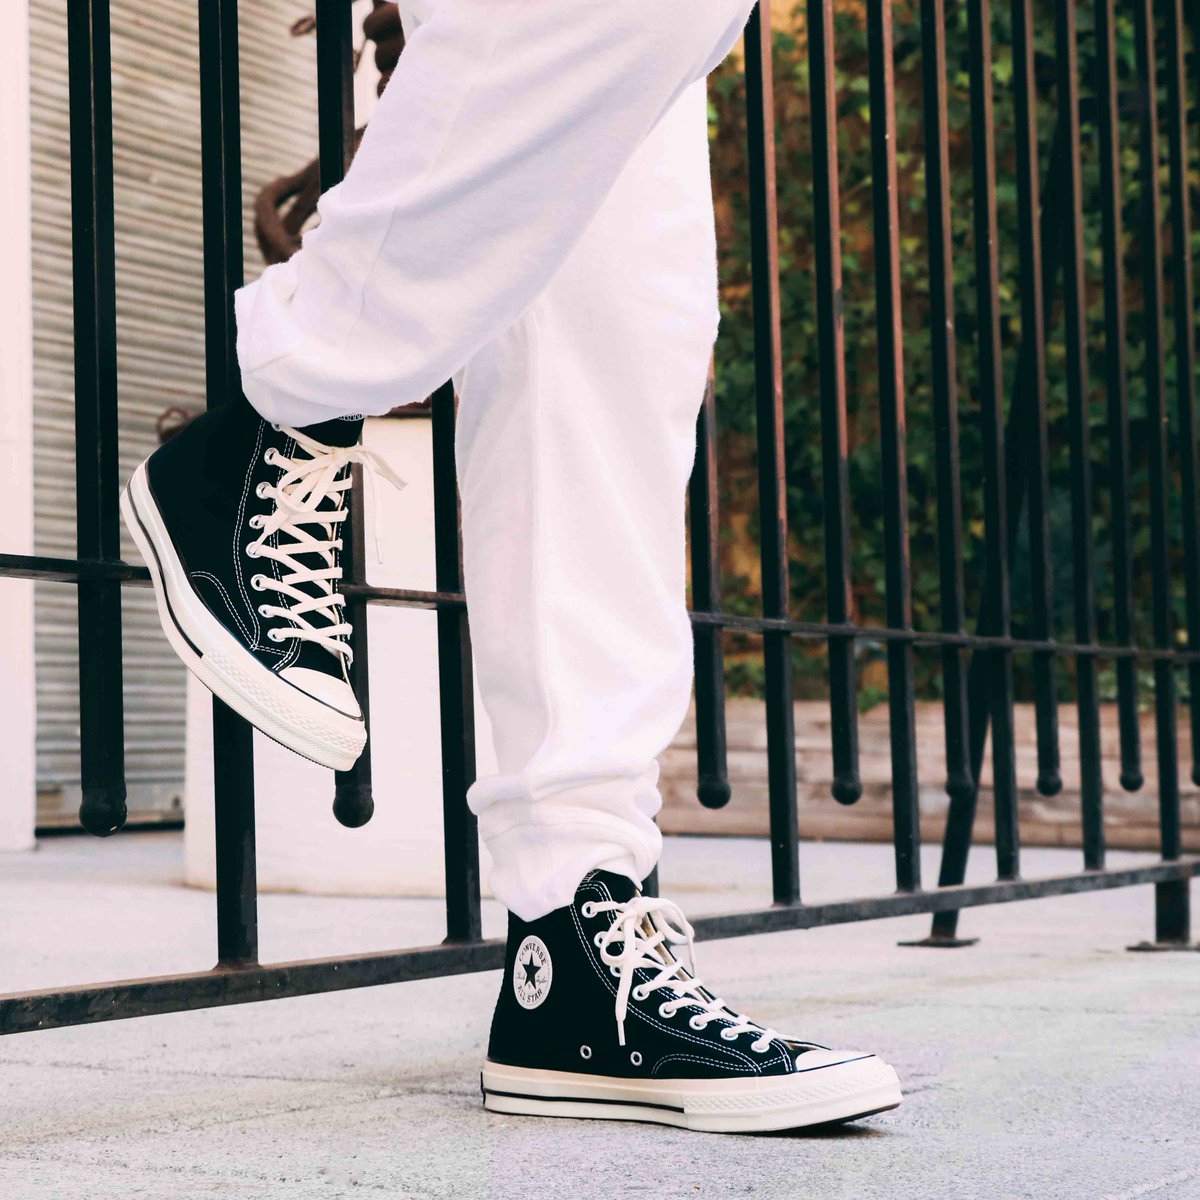 Converse Chuck Taylor All Star 70 is in 